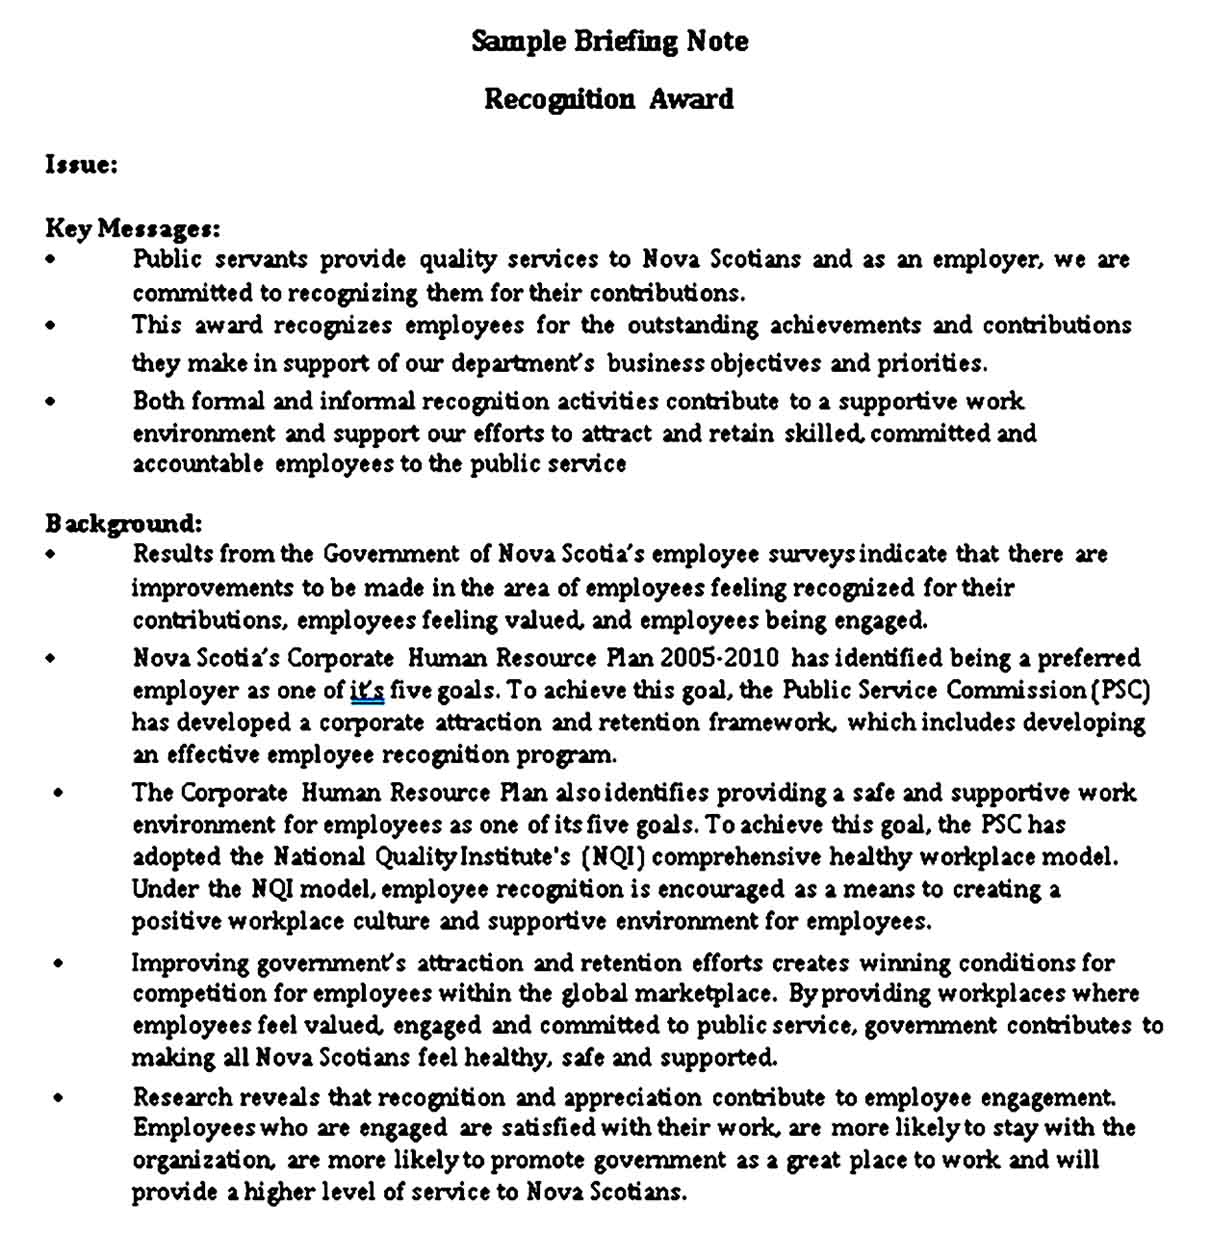 Example of Briefing Note